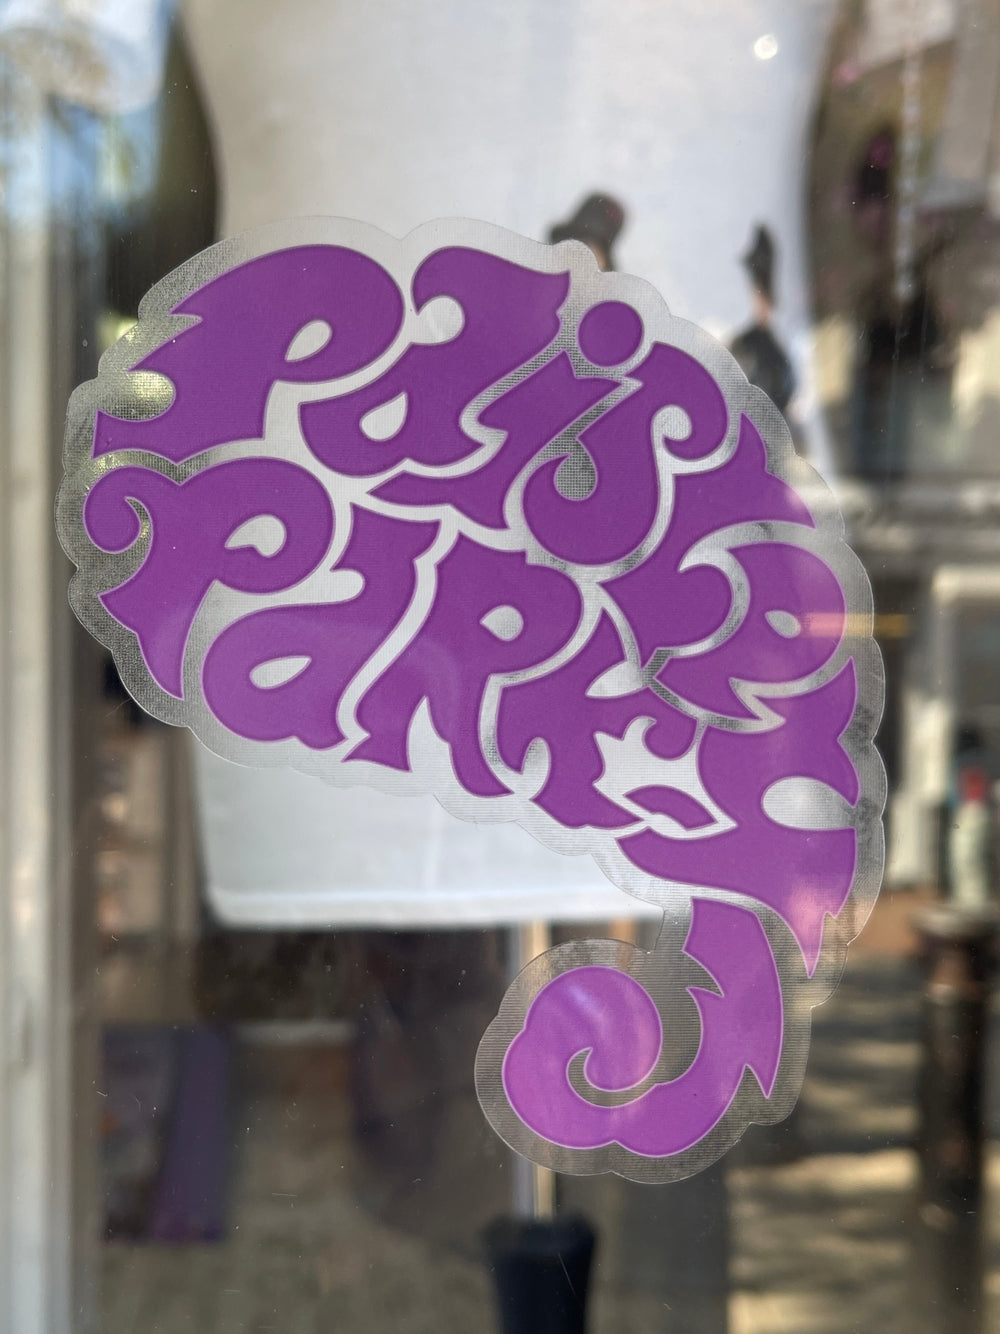 Paisley Park Official Window Decal Brand New Purple Logo Prince